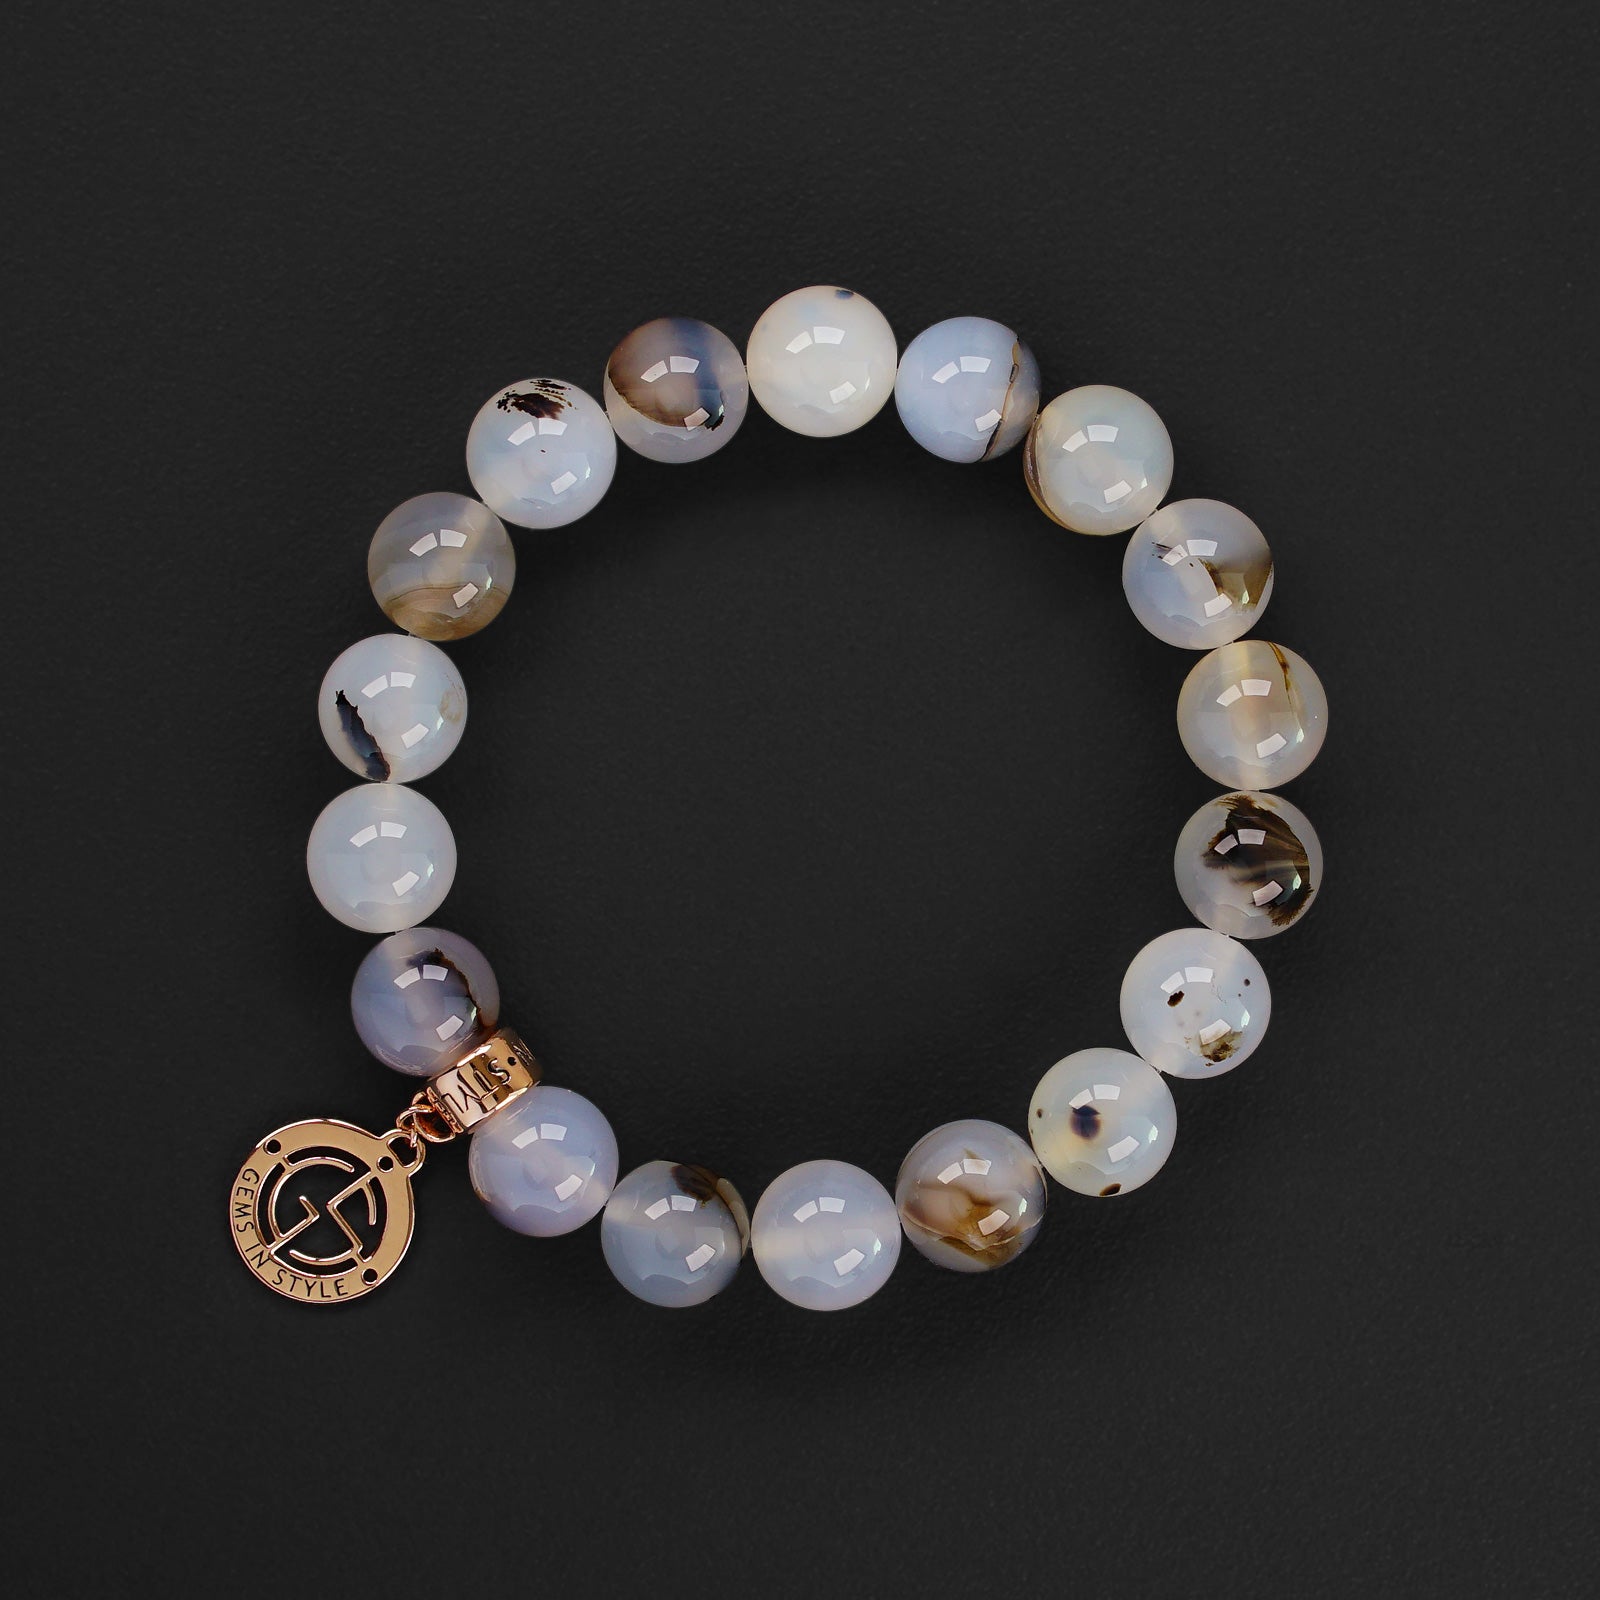 Faceted Natural Agate Stone Bead Bracelet Set with Brushed Gold